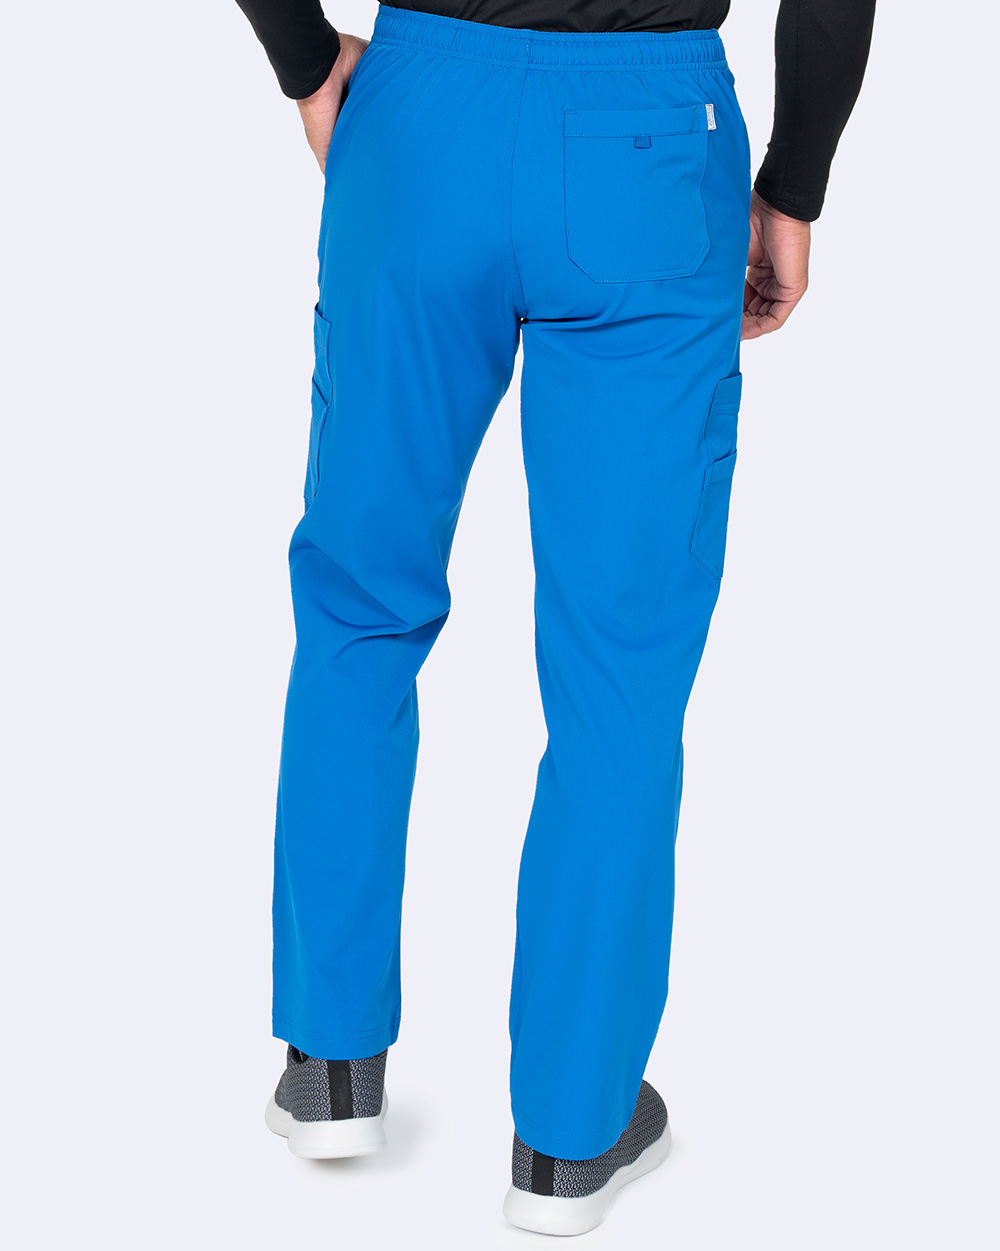 Ava Therese Men's Cargo Pant